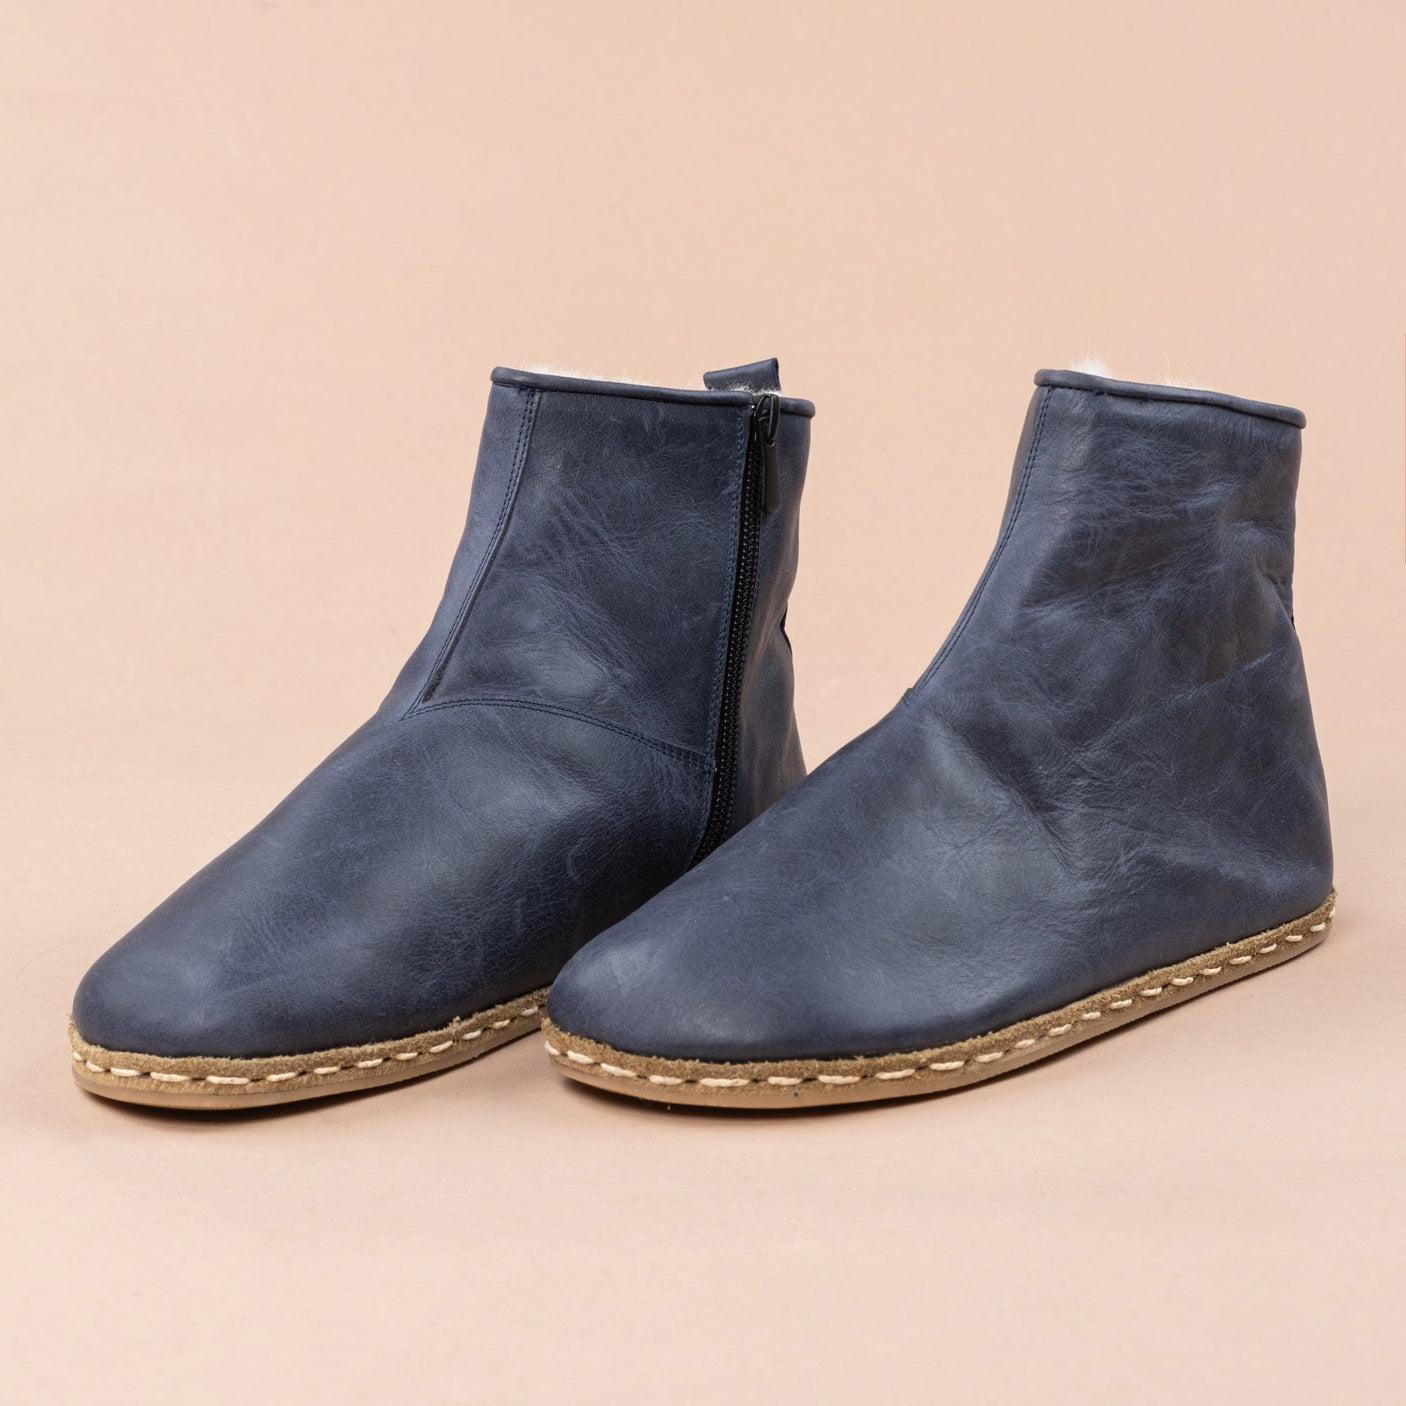 Women's Blue Barefoot Boots with Fur